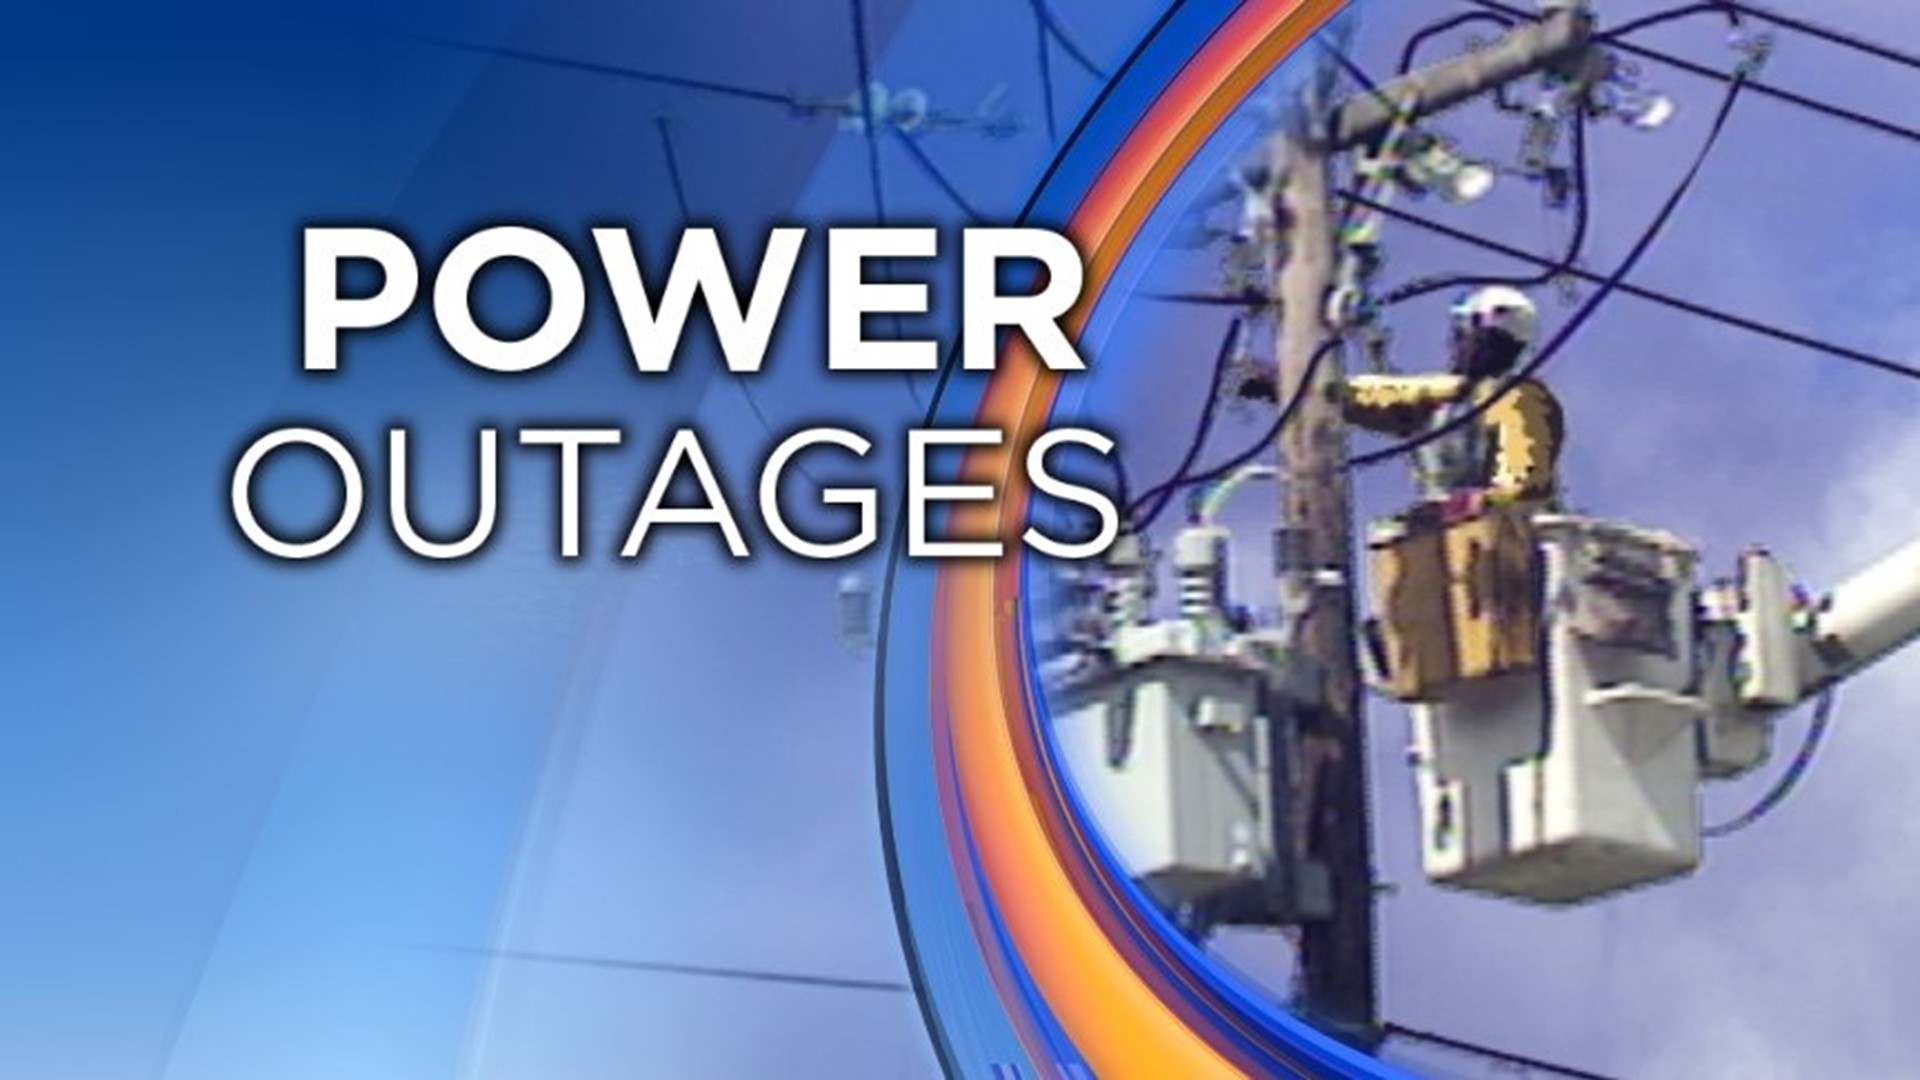 Thousands Remain Without Power Following Snowstorm